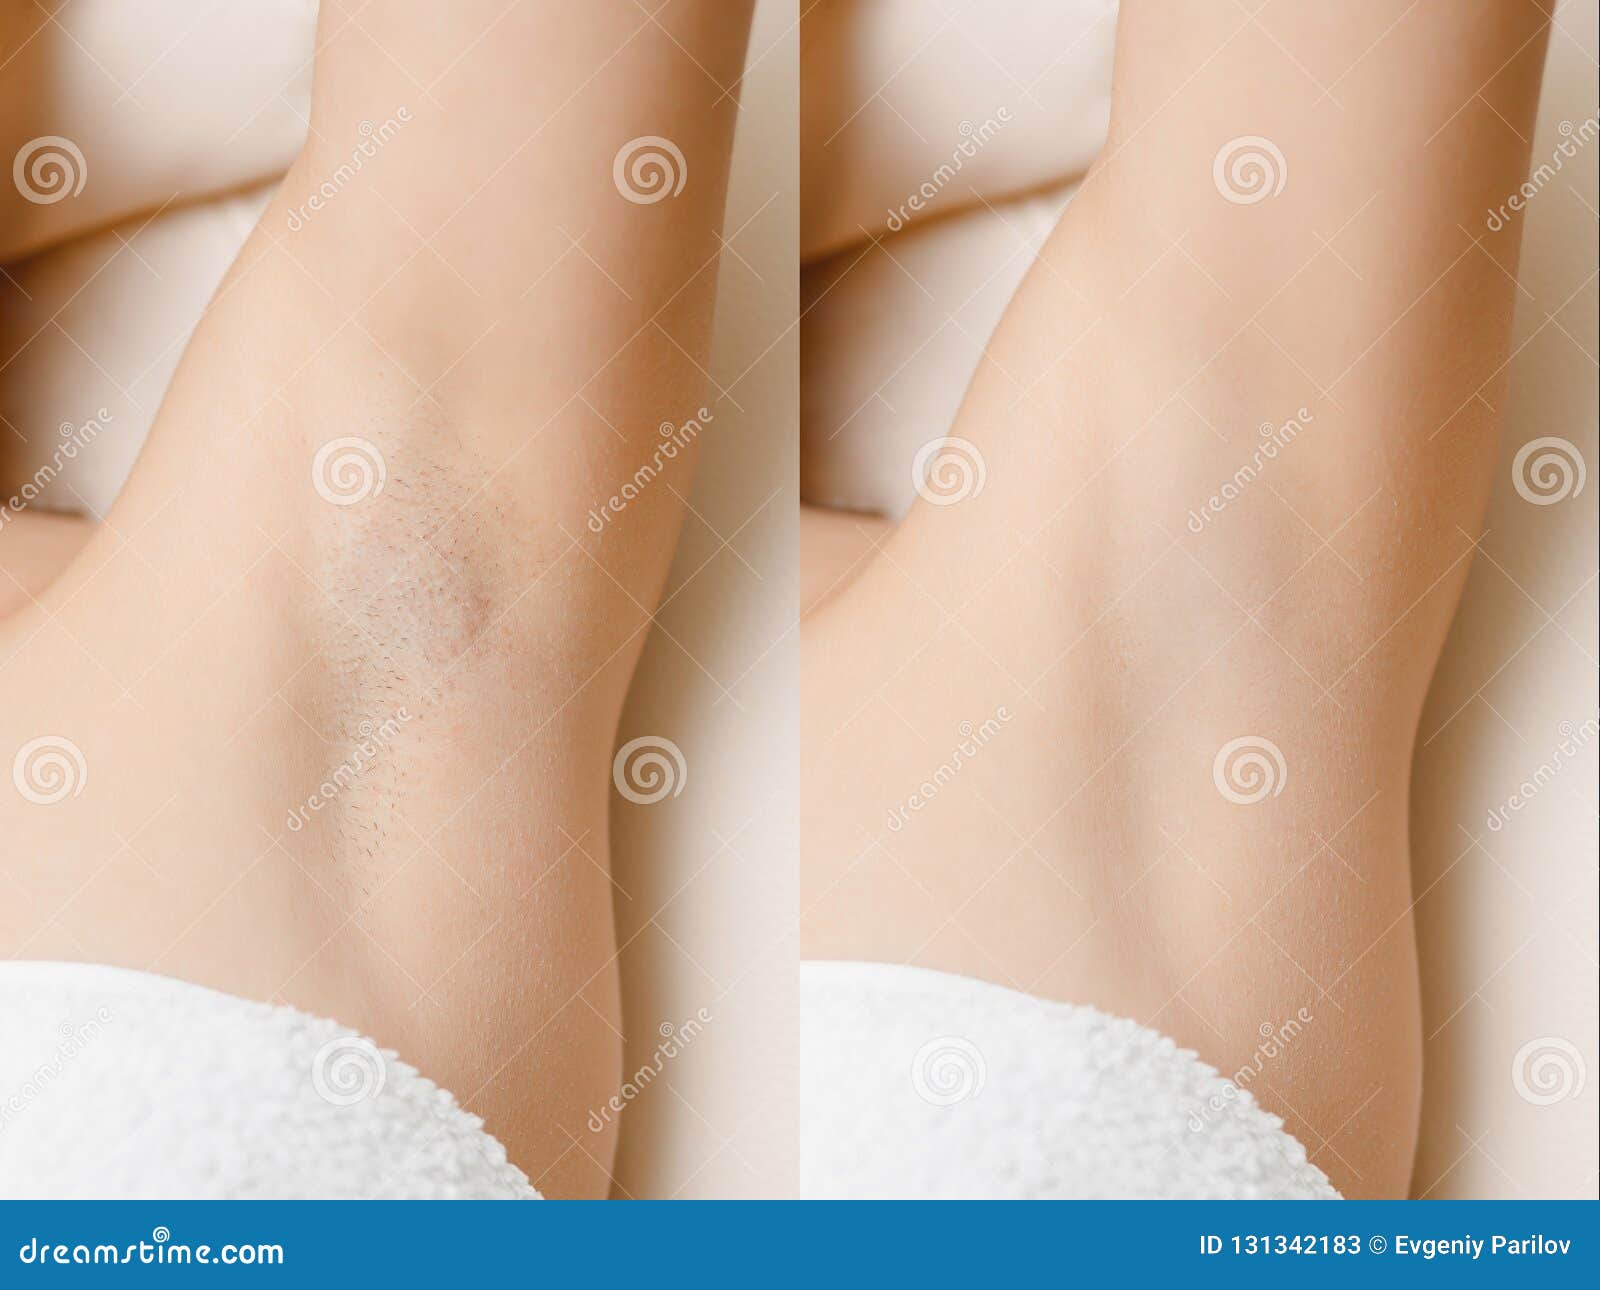 women underarm hair removal before and after